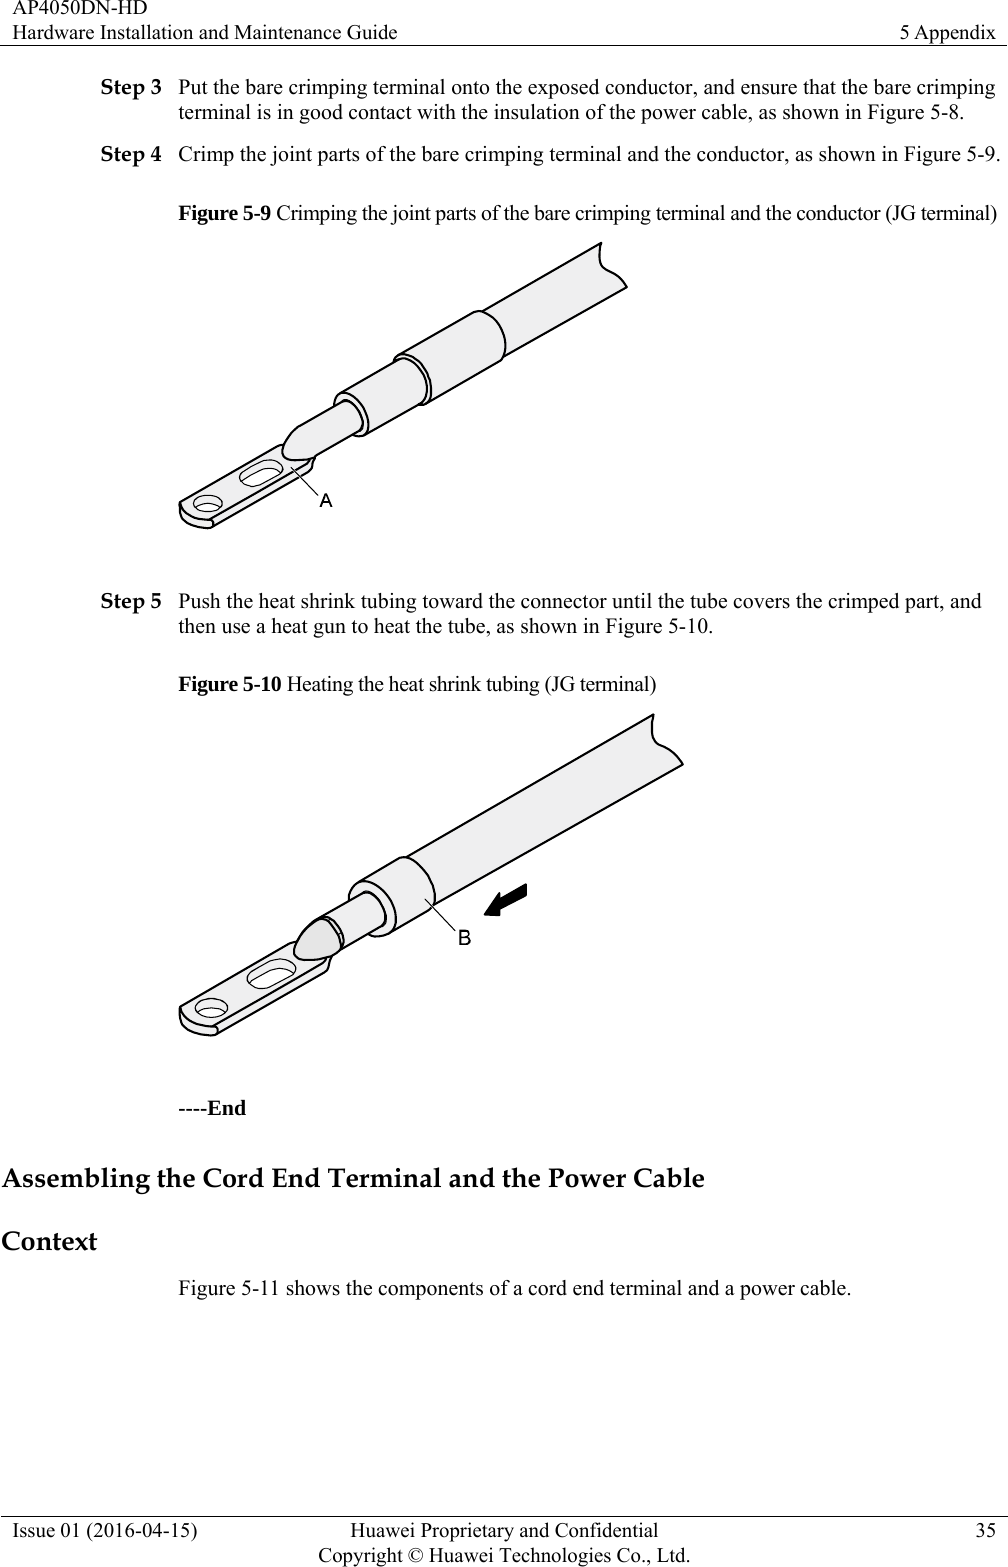 AP4050DN-HD Hardware Installation and Maintenance Guide  5 Appendix Issue 01 (2016-04-15)  Huawei Proprietary and Confidential         Copyright © Huawei Technologies Co., Ltd.35 Step 3 Put the bare crimping terminal onto the exposed conductor, and ensure that the bare crimping terminal is in good contact with the insulation of the power cable, as shown in Figure 5-8. Step 4 Crimp the joint parts of the bare crimping terminal and the conductor, as shown in Figure 5-9. Figure 5-9 Crimping the joint parts of the bare crimping terminal and the conductor (JG terminal)   Step 5 Push the heat shrink tubing toward the connector until the tube covers the crimped part, and then use a heat gun to heat the tube, as shown in Figure 5-10. Figure 5-10 Heating the heat shrink tubing (JG terminal)   ----End Assembling the Cord End Terminal and the Power Cable Context Figure 5-11 shows the components of a cord end terminal and a power cable. 